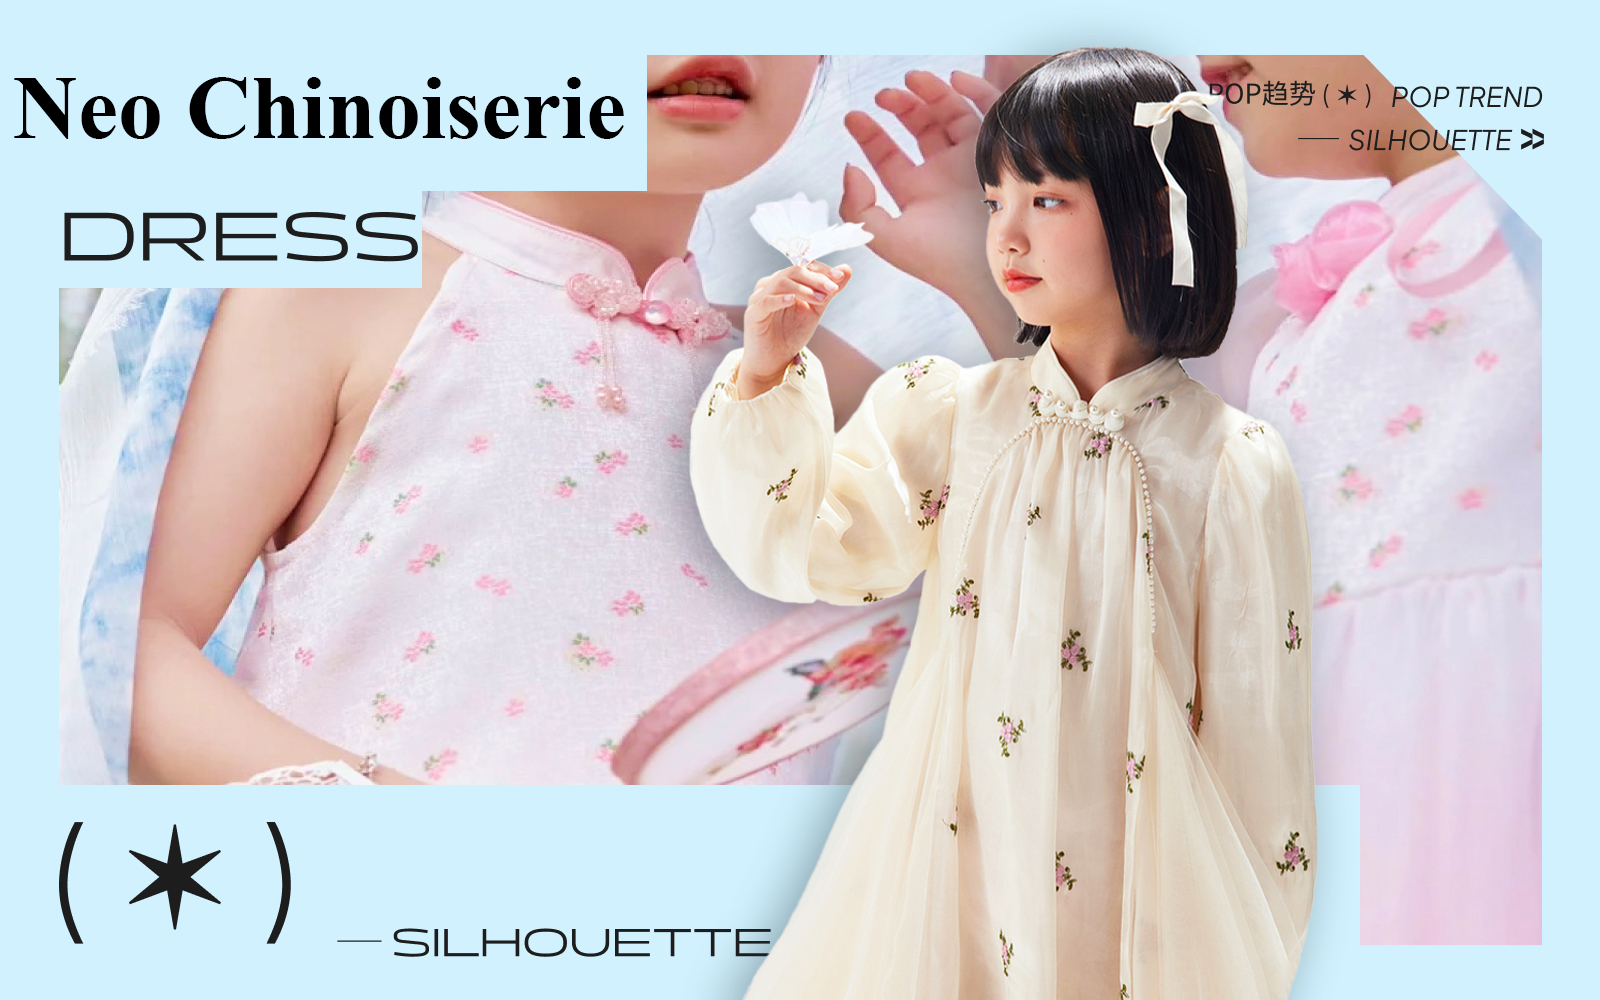 Neo Chinoiserie -- The Silhouette Trend for Girls' Dress